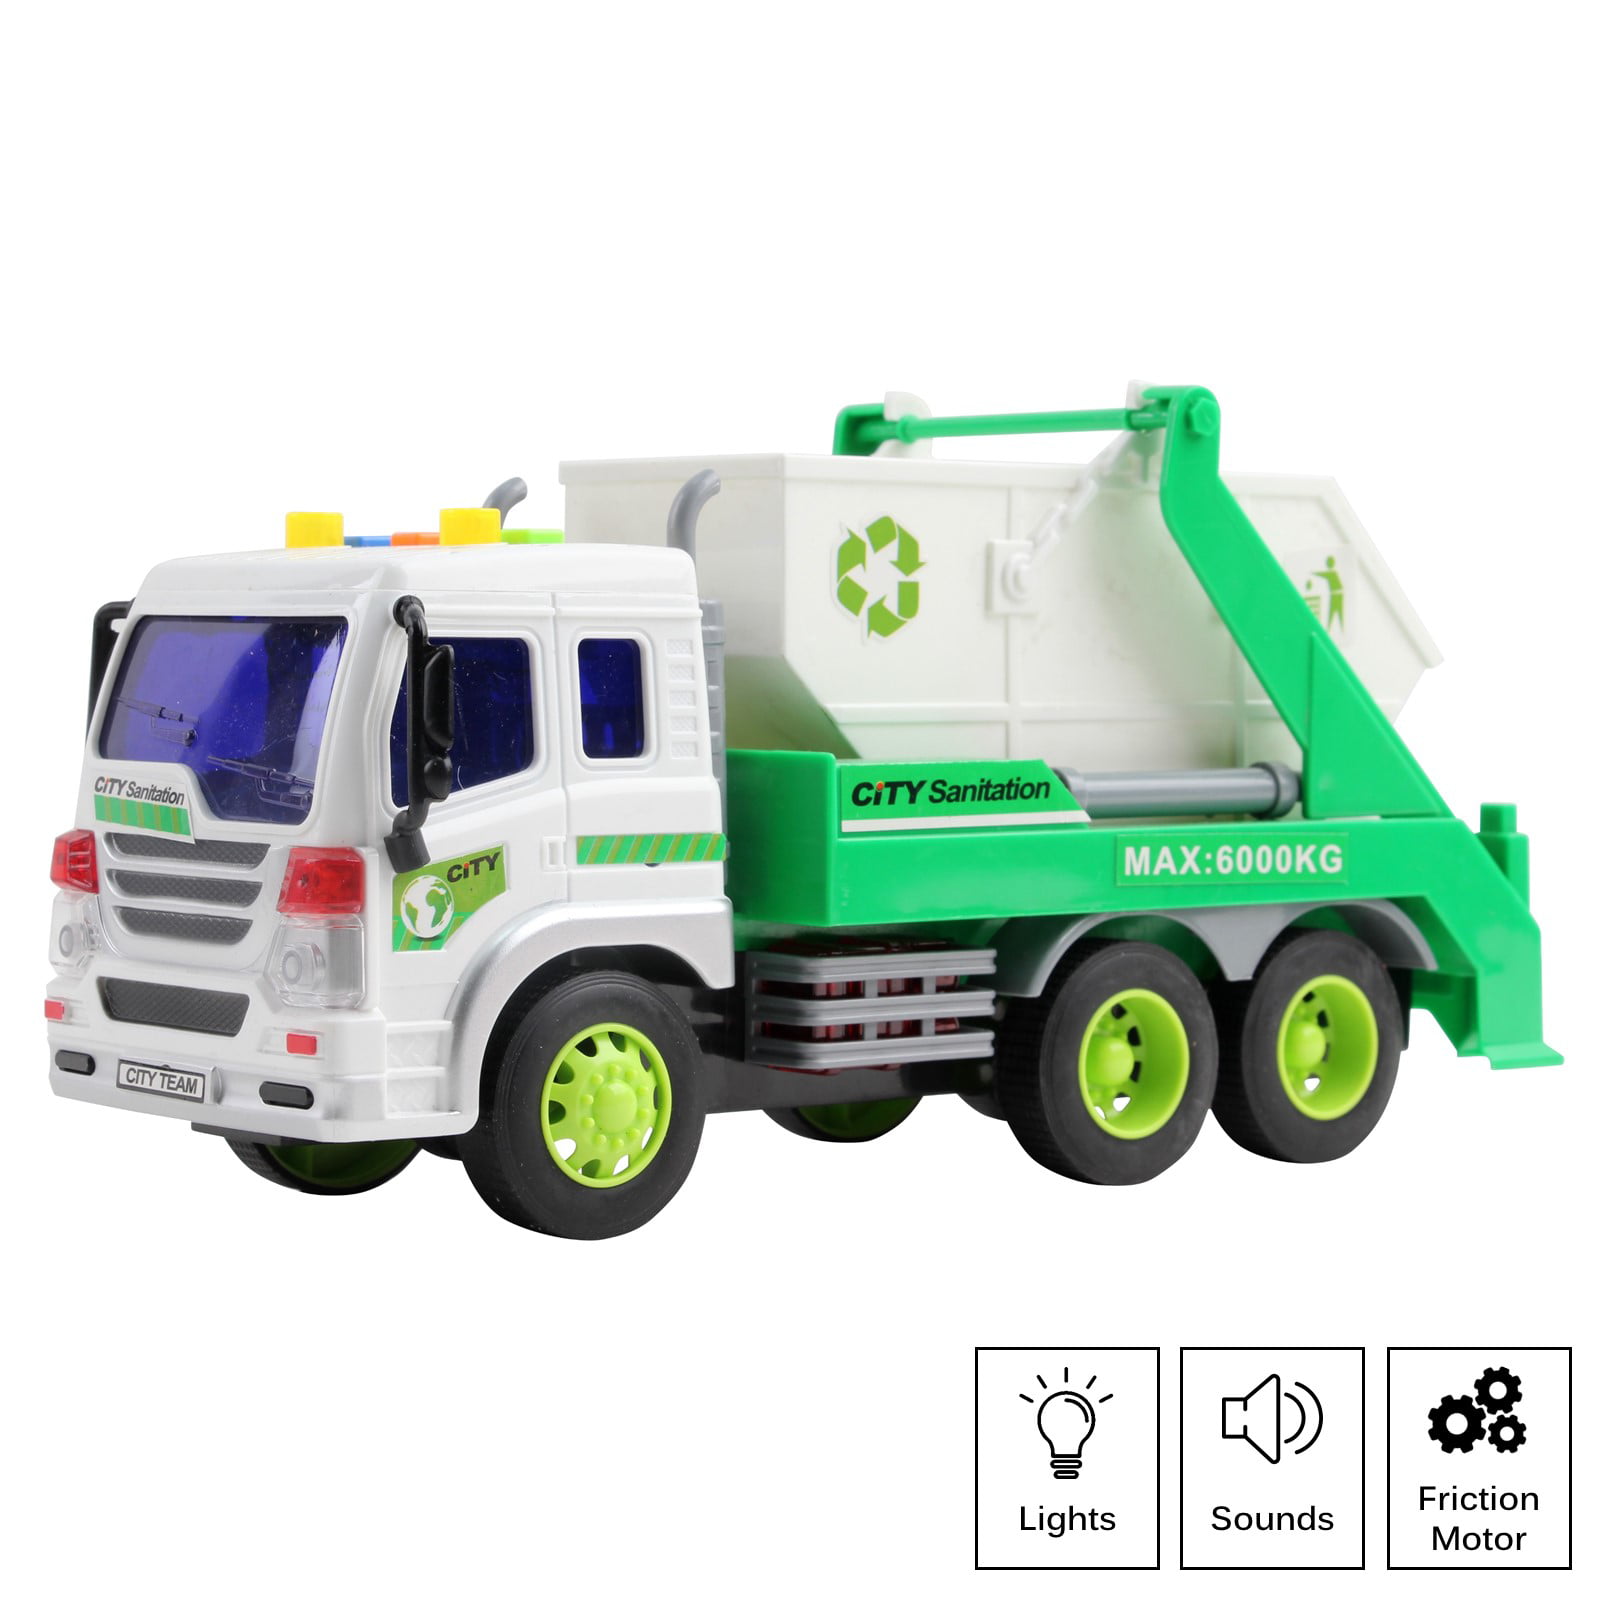 RECYCLING TRUCK" WITH LIGHTS & SOUNDS B11 TONKA TOUGH " RESCUE FORCE GARBAGE 